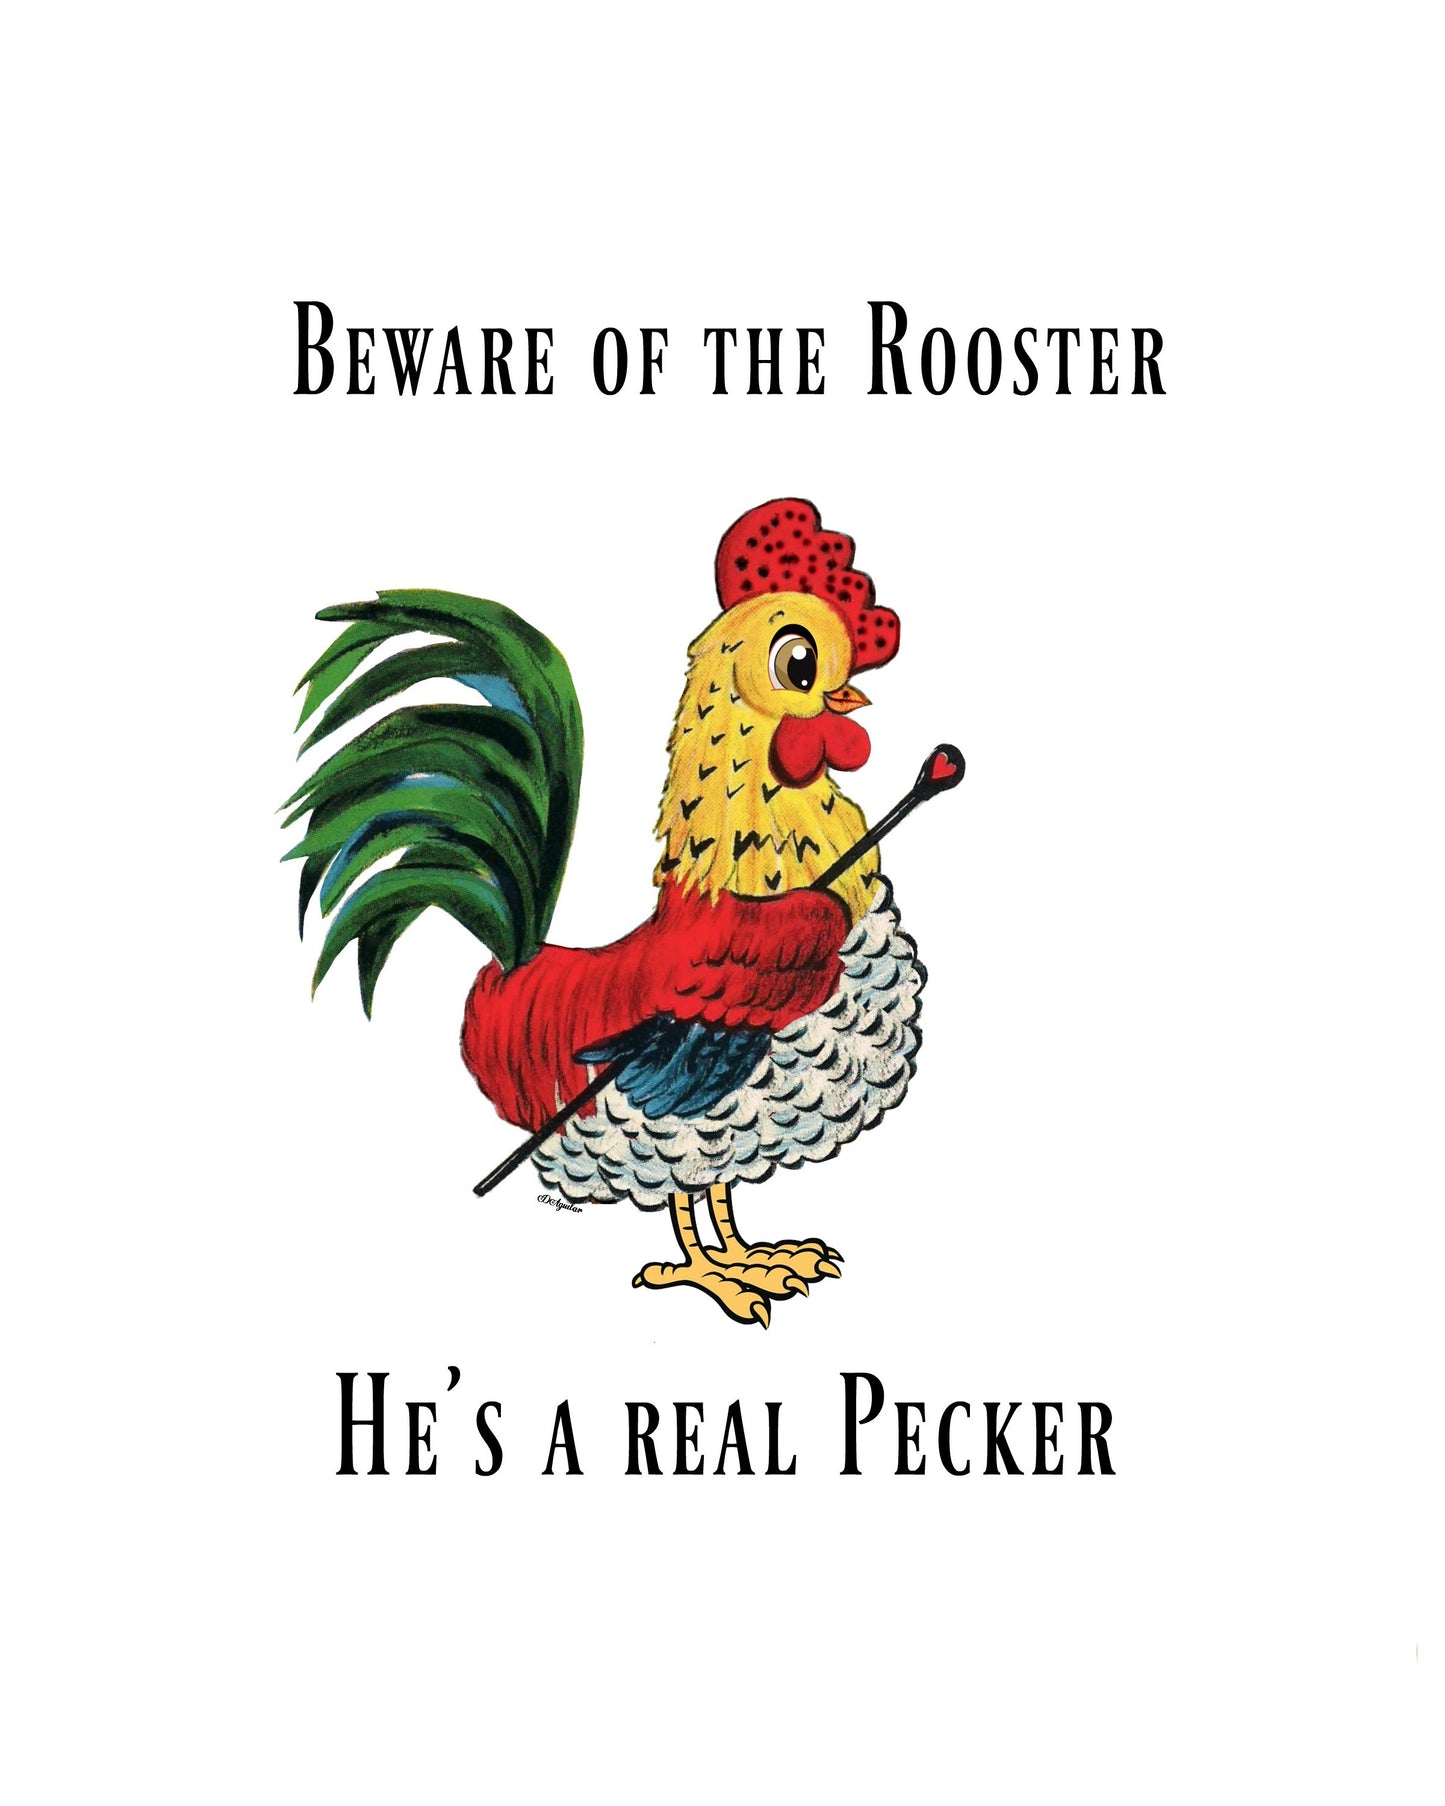 "Beware of the Rooster, He's a real Pecker "